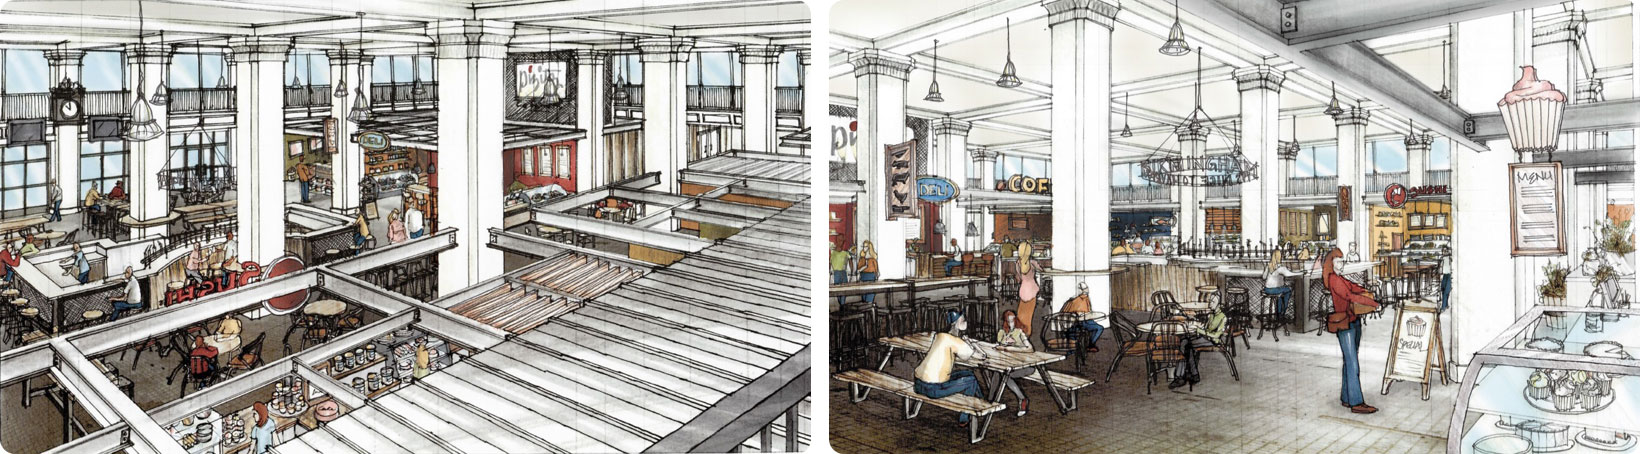 The food hall at the Pizitz building will have a variety of foods and a bar in the center. (contributed)